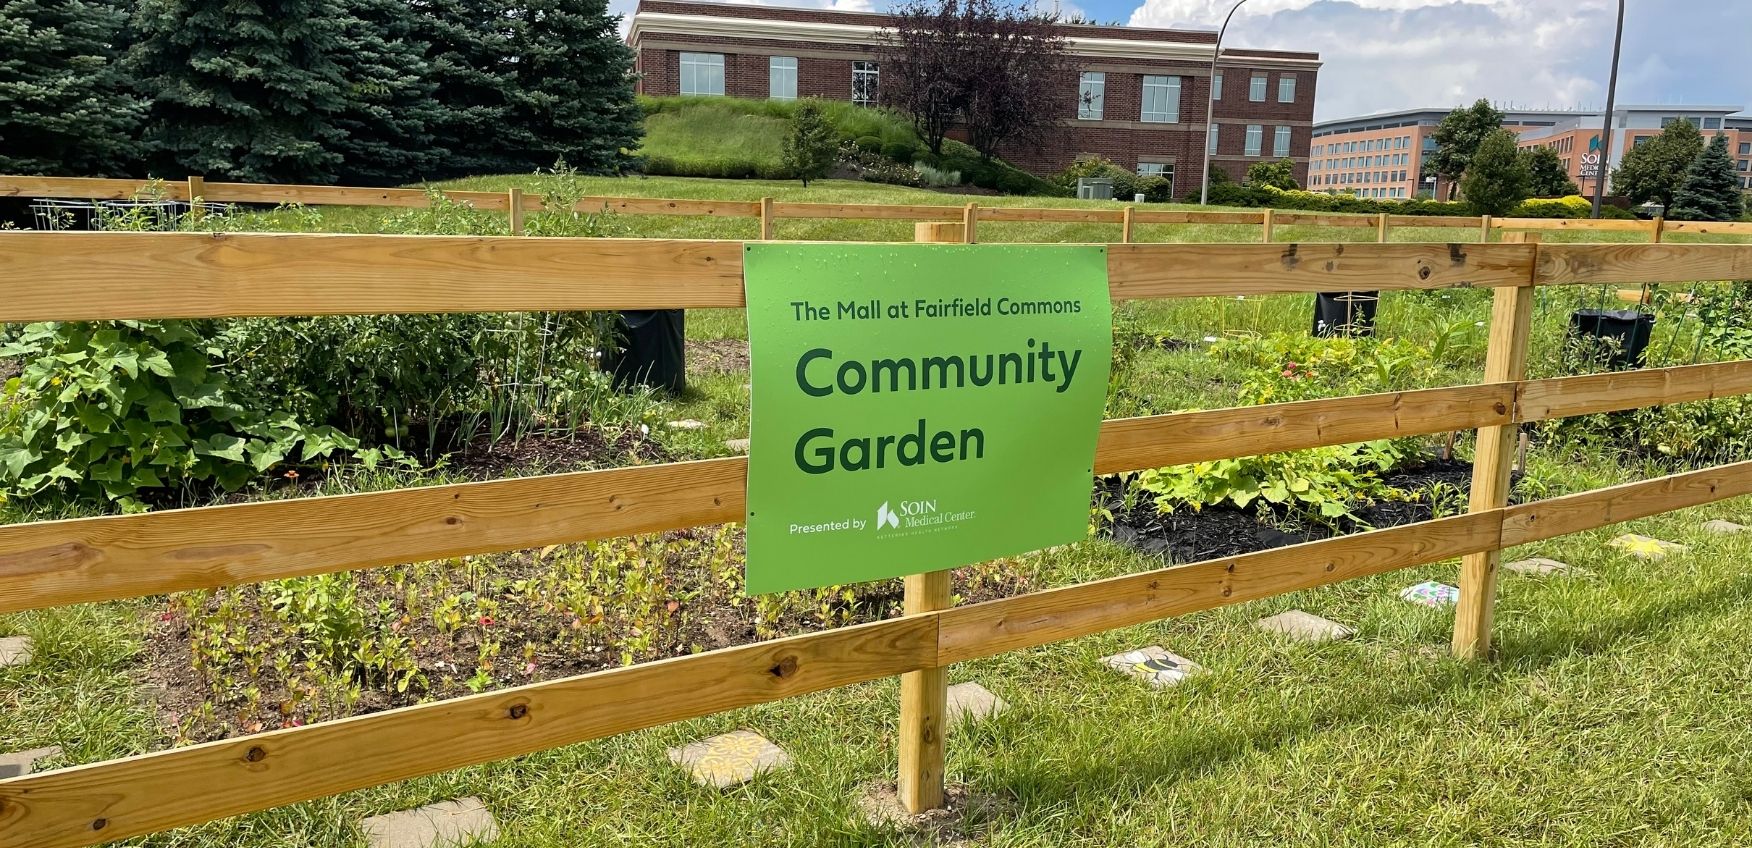 Community garden sign with plants in background.